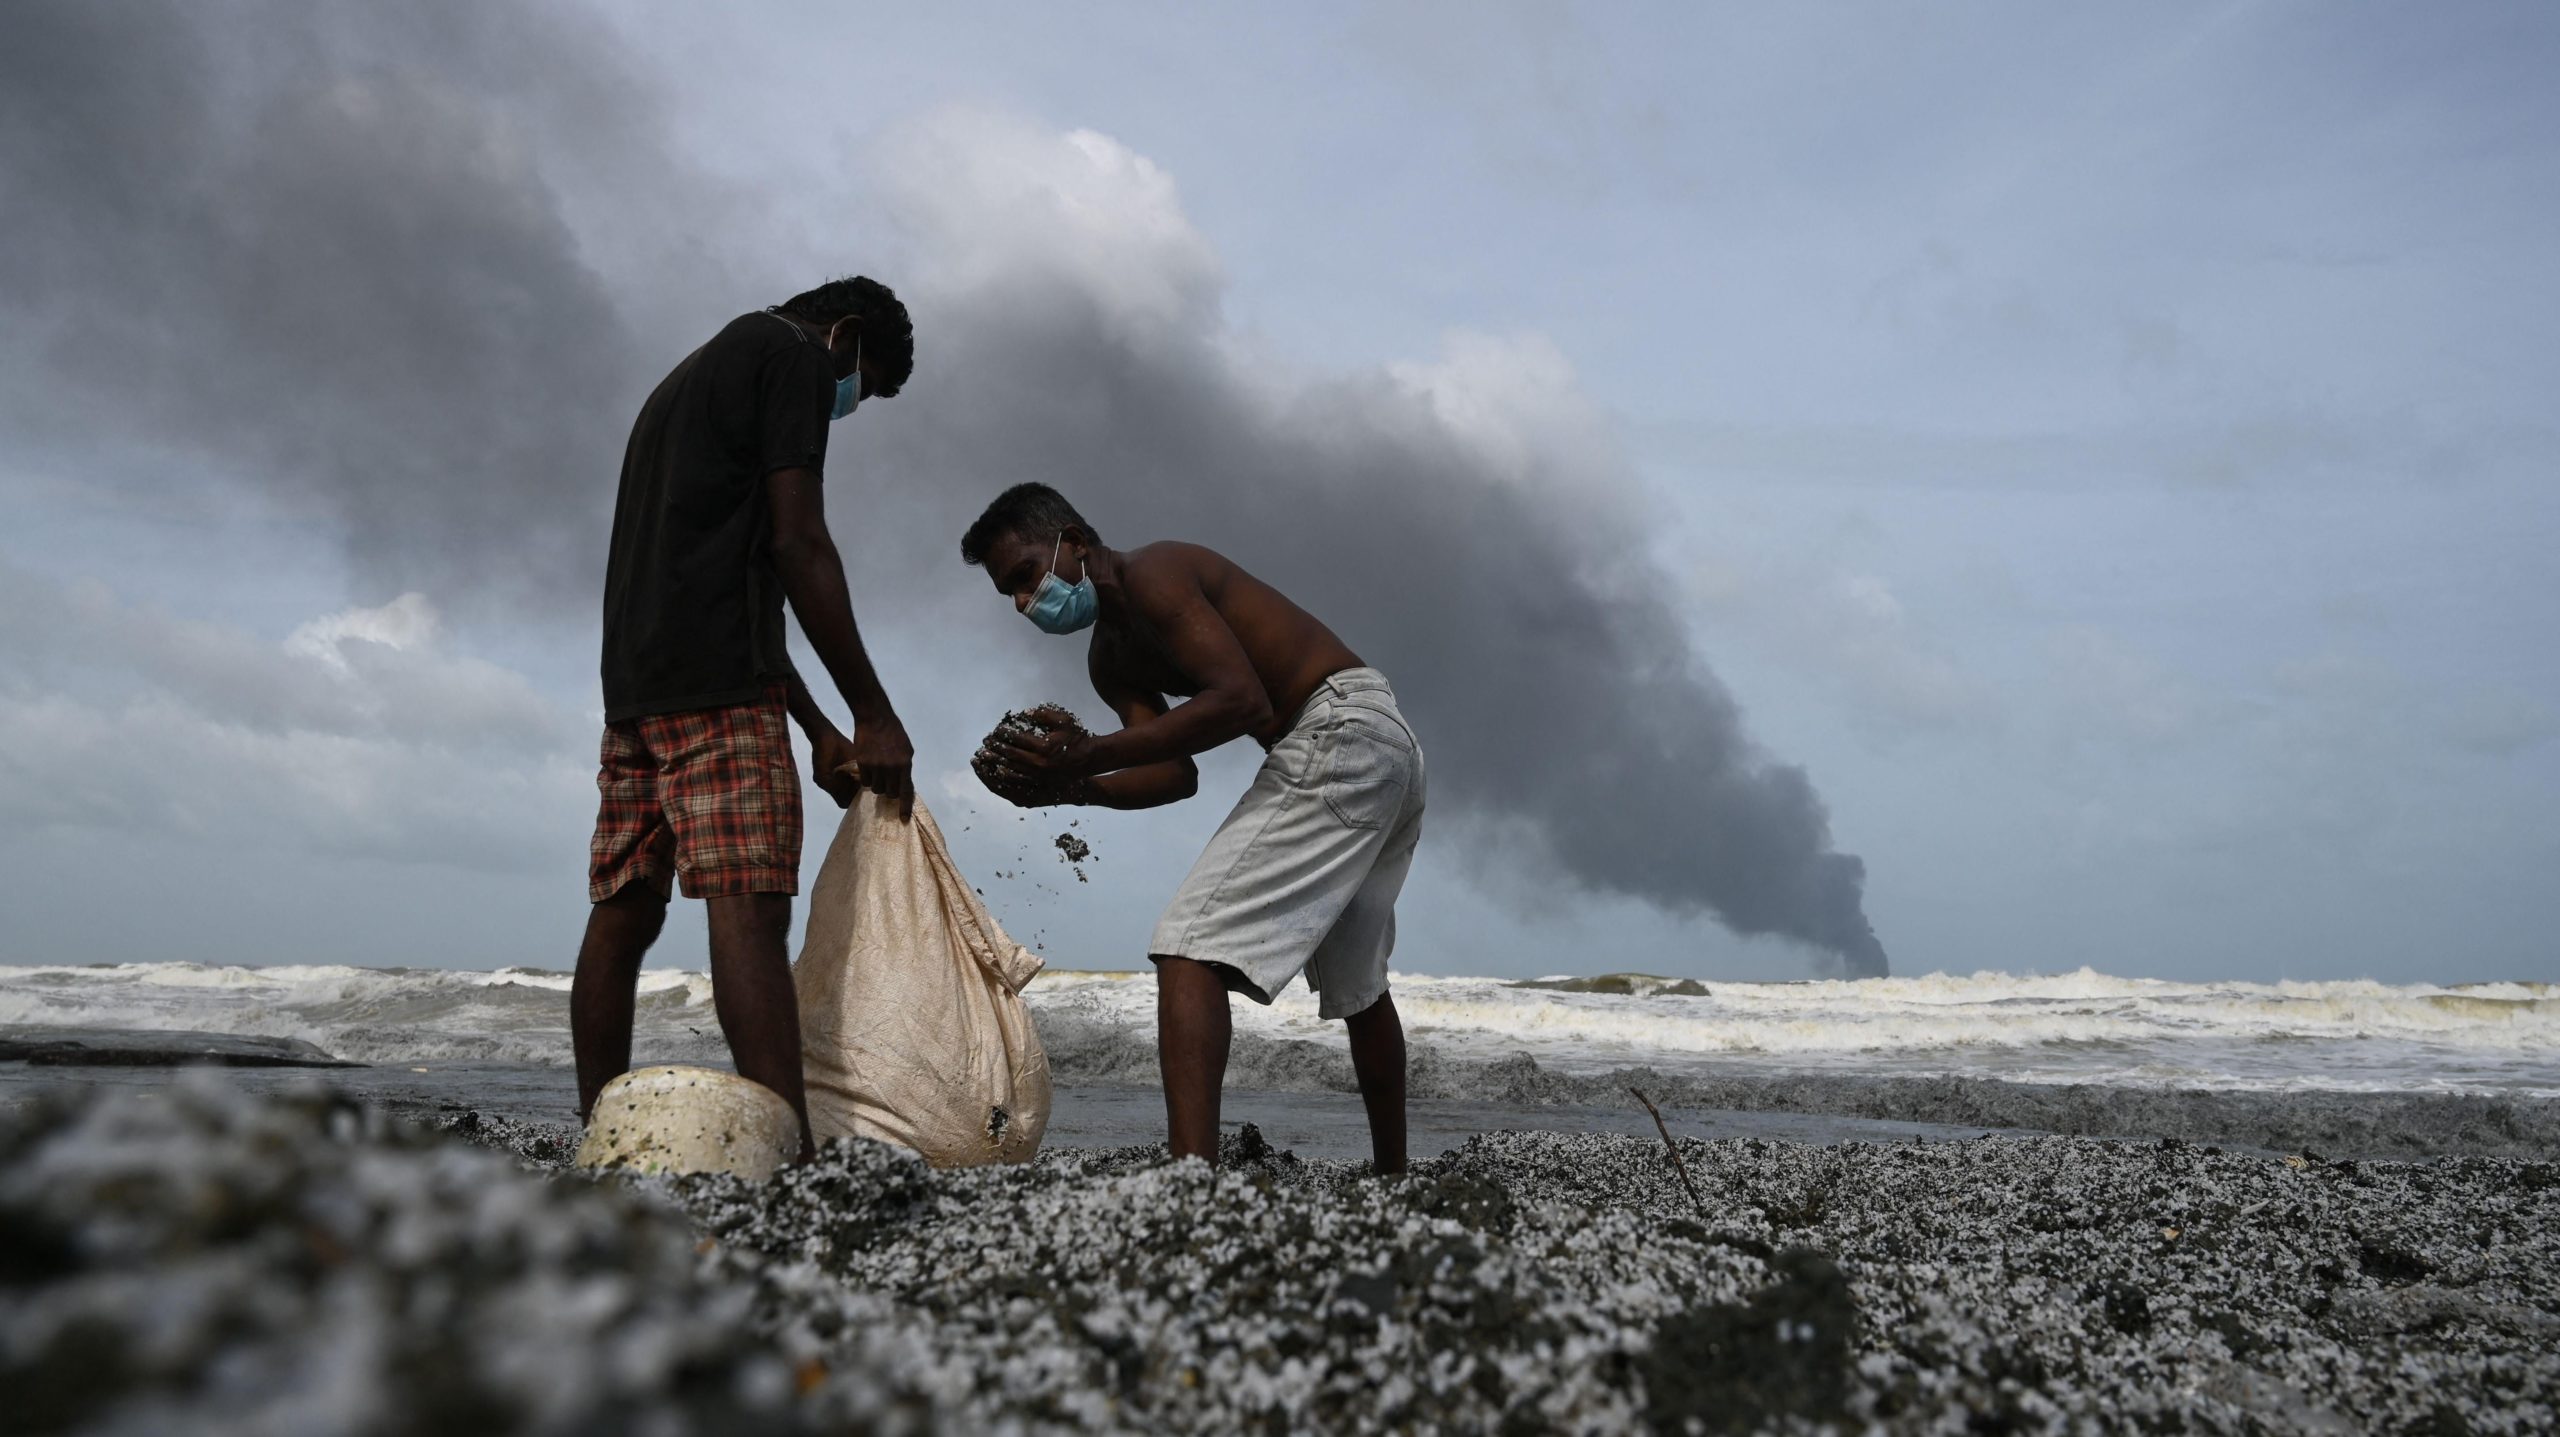 Residents collect debris among plastic pellets spilled by the ship on May 26. (Photo: Lakruwan Wanniarachchi/ AFP, Getty Images)